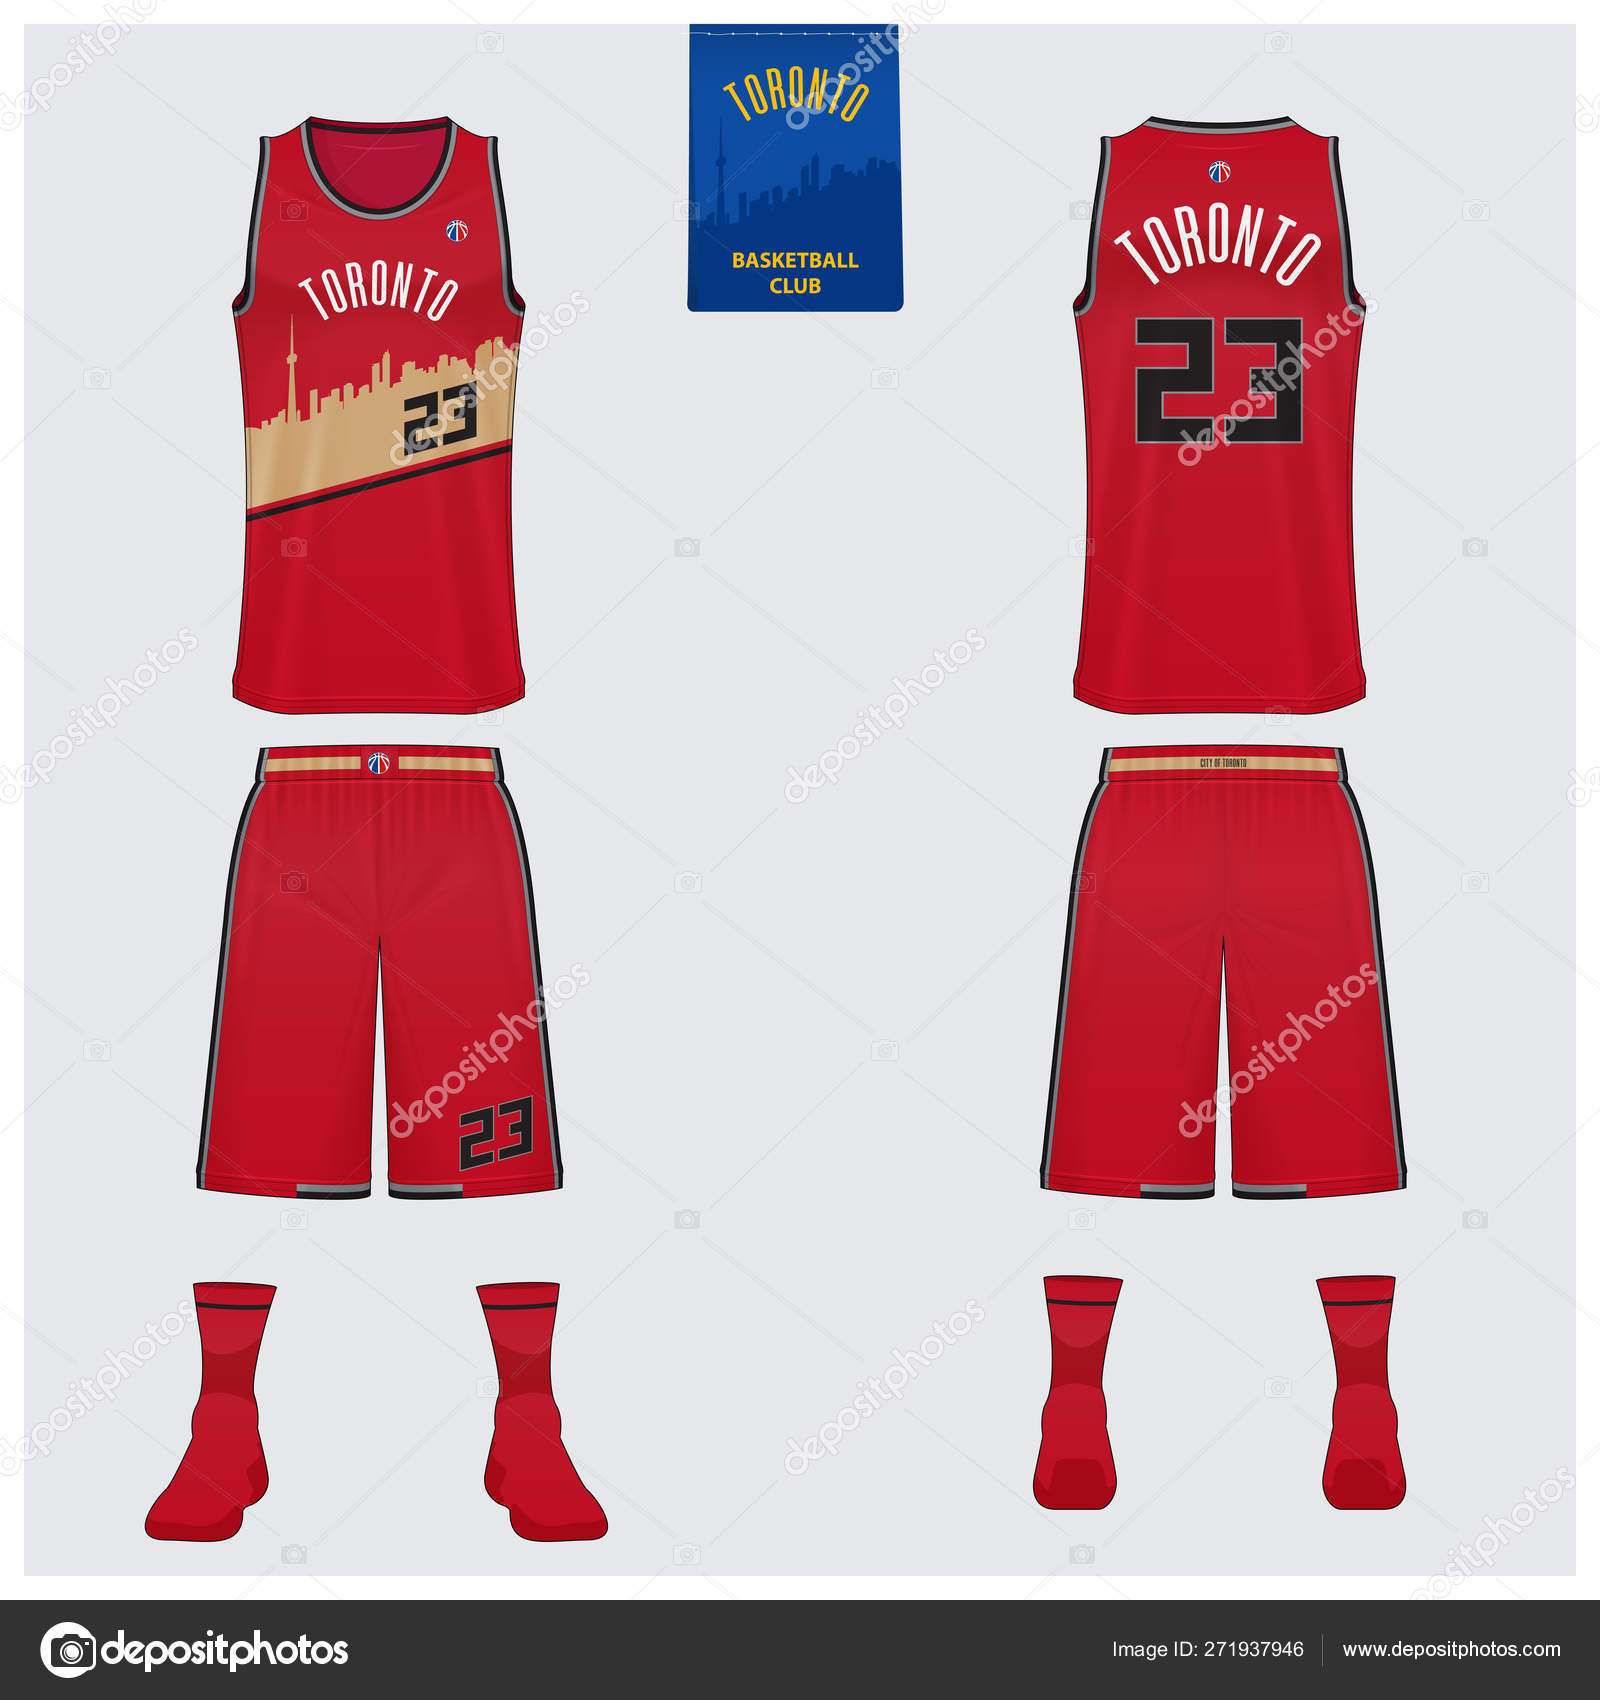 Jersey mockup for basketball club front and back view